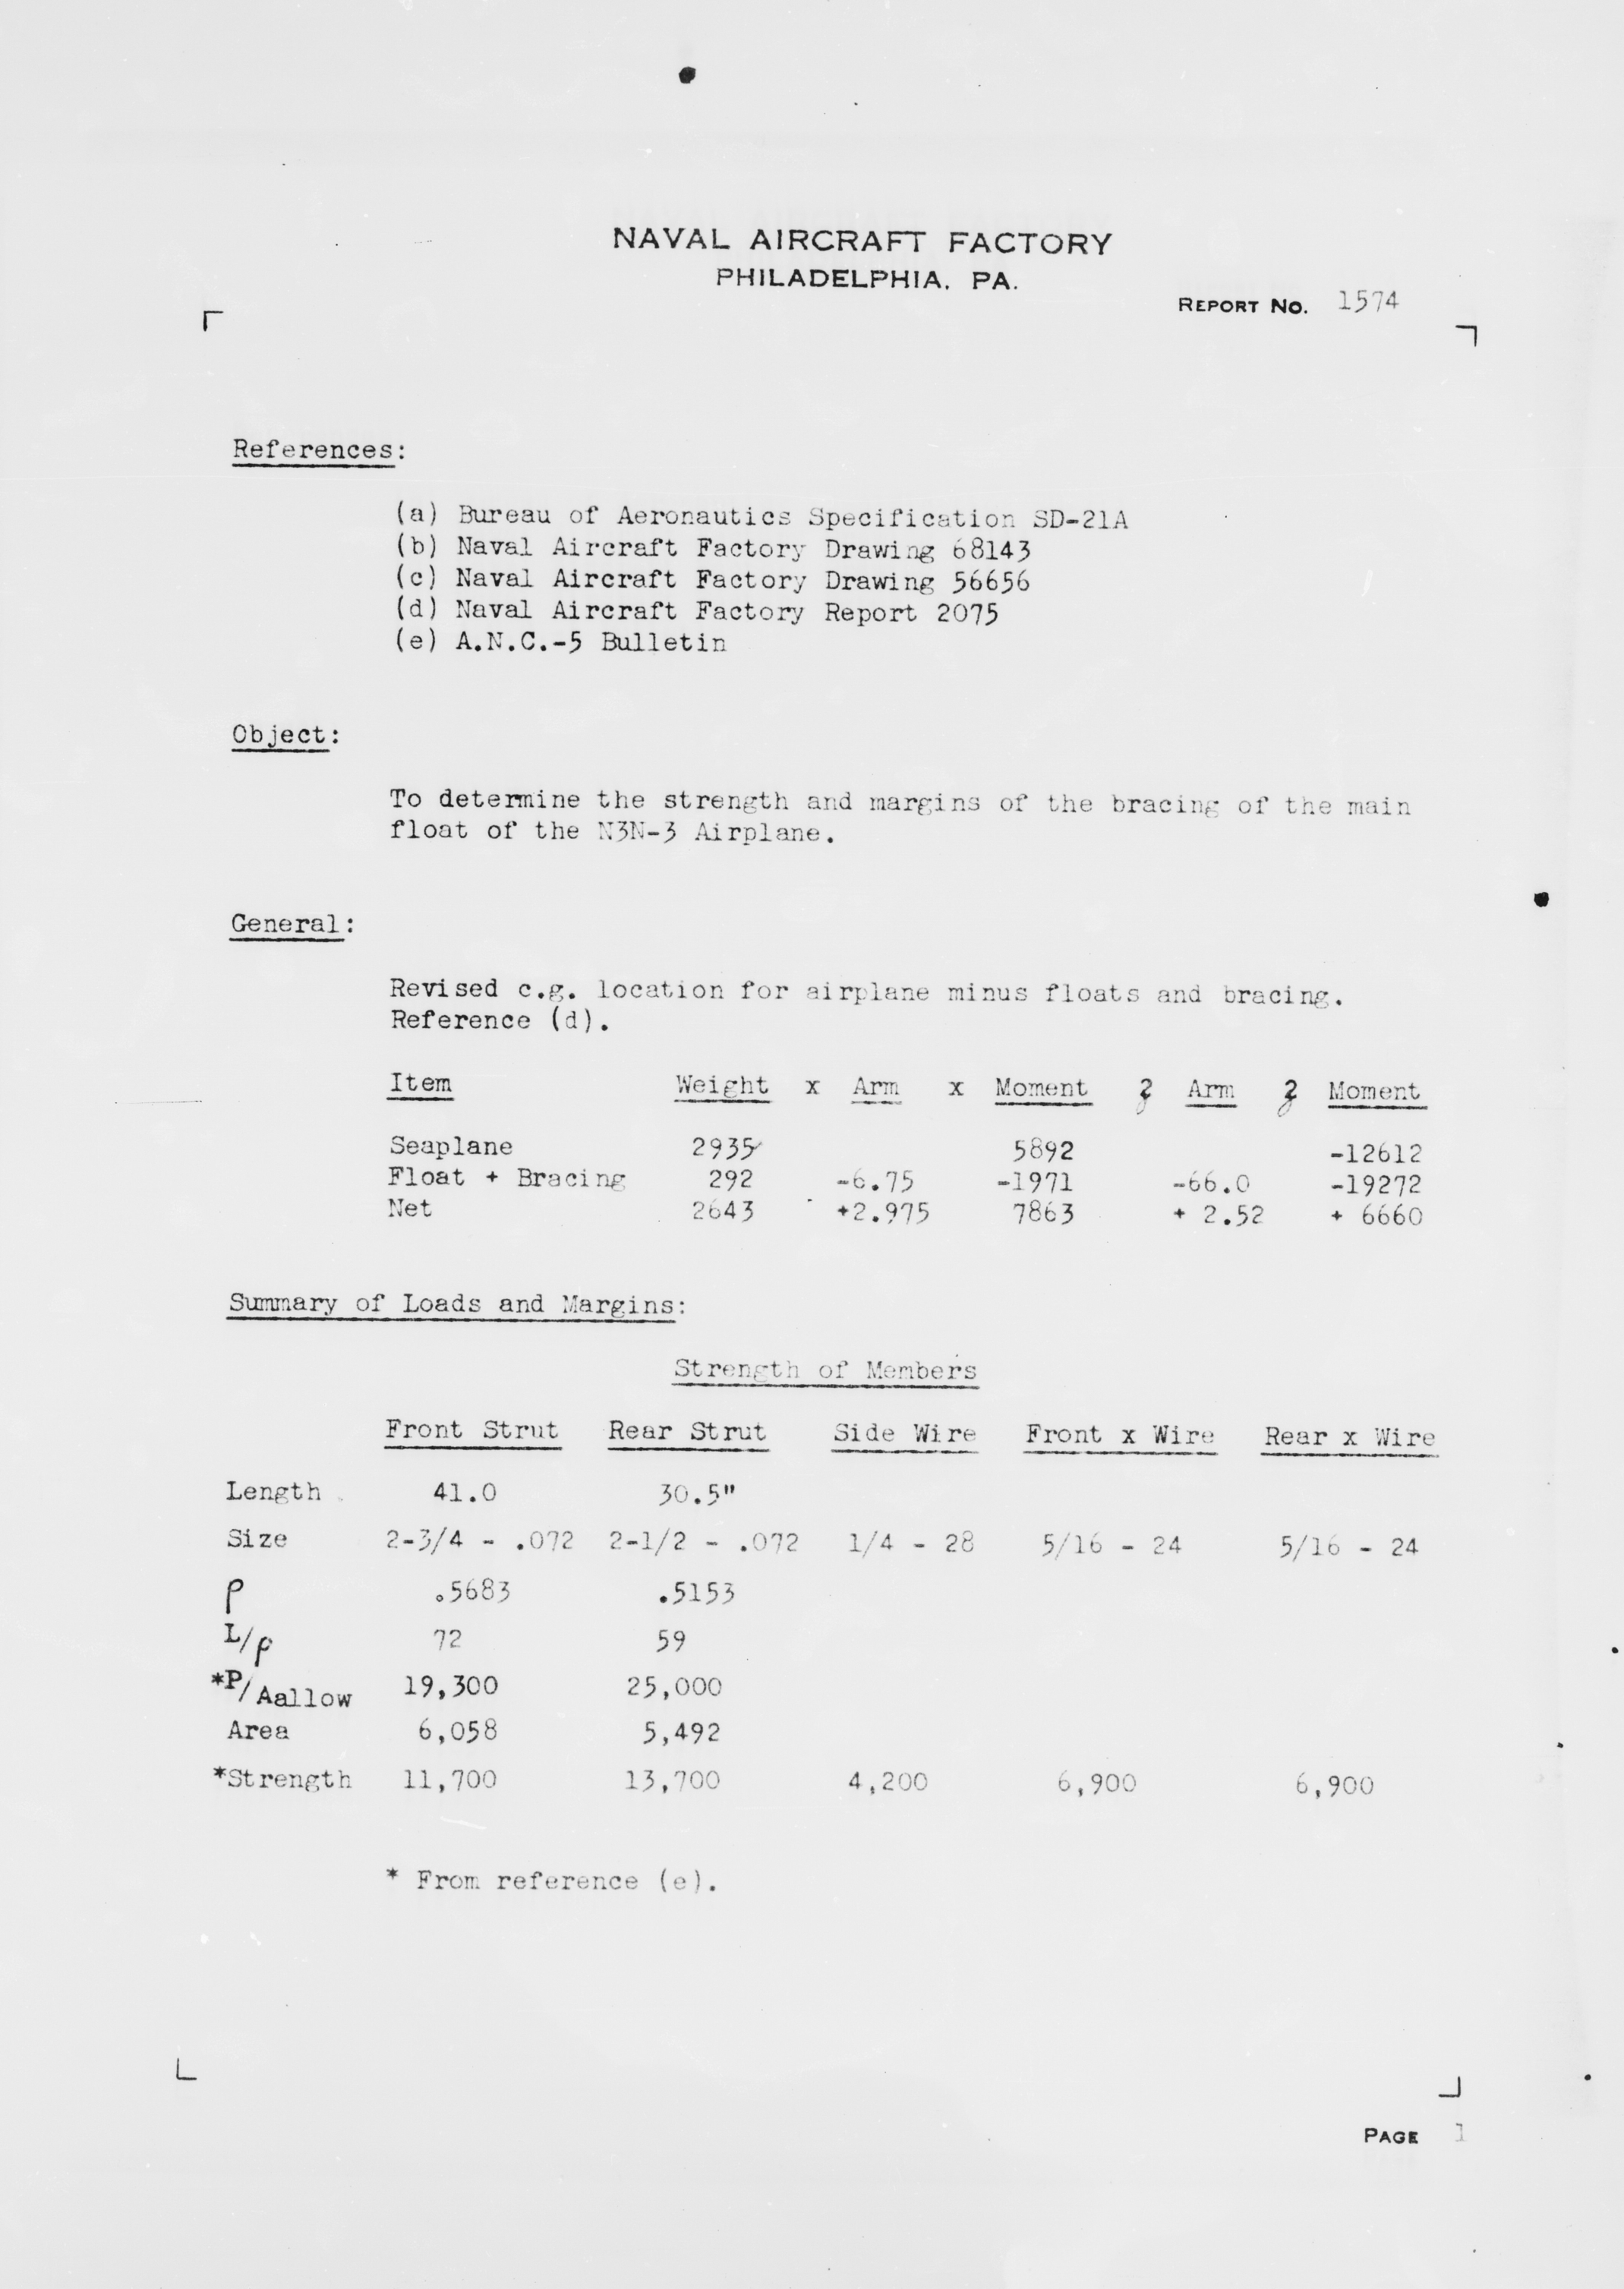 Sample page 5 from AirCorps Library document: Main Float Bracing Analysis for Model N3N-3 Airplane